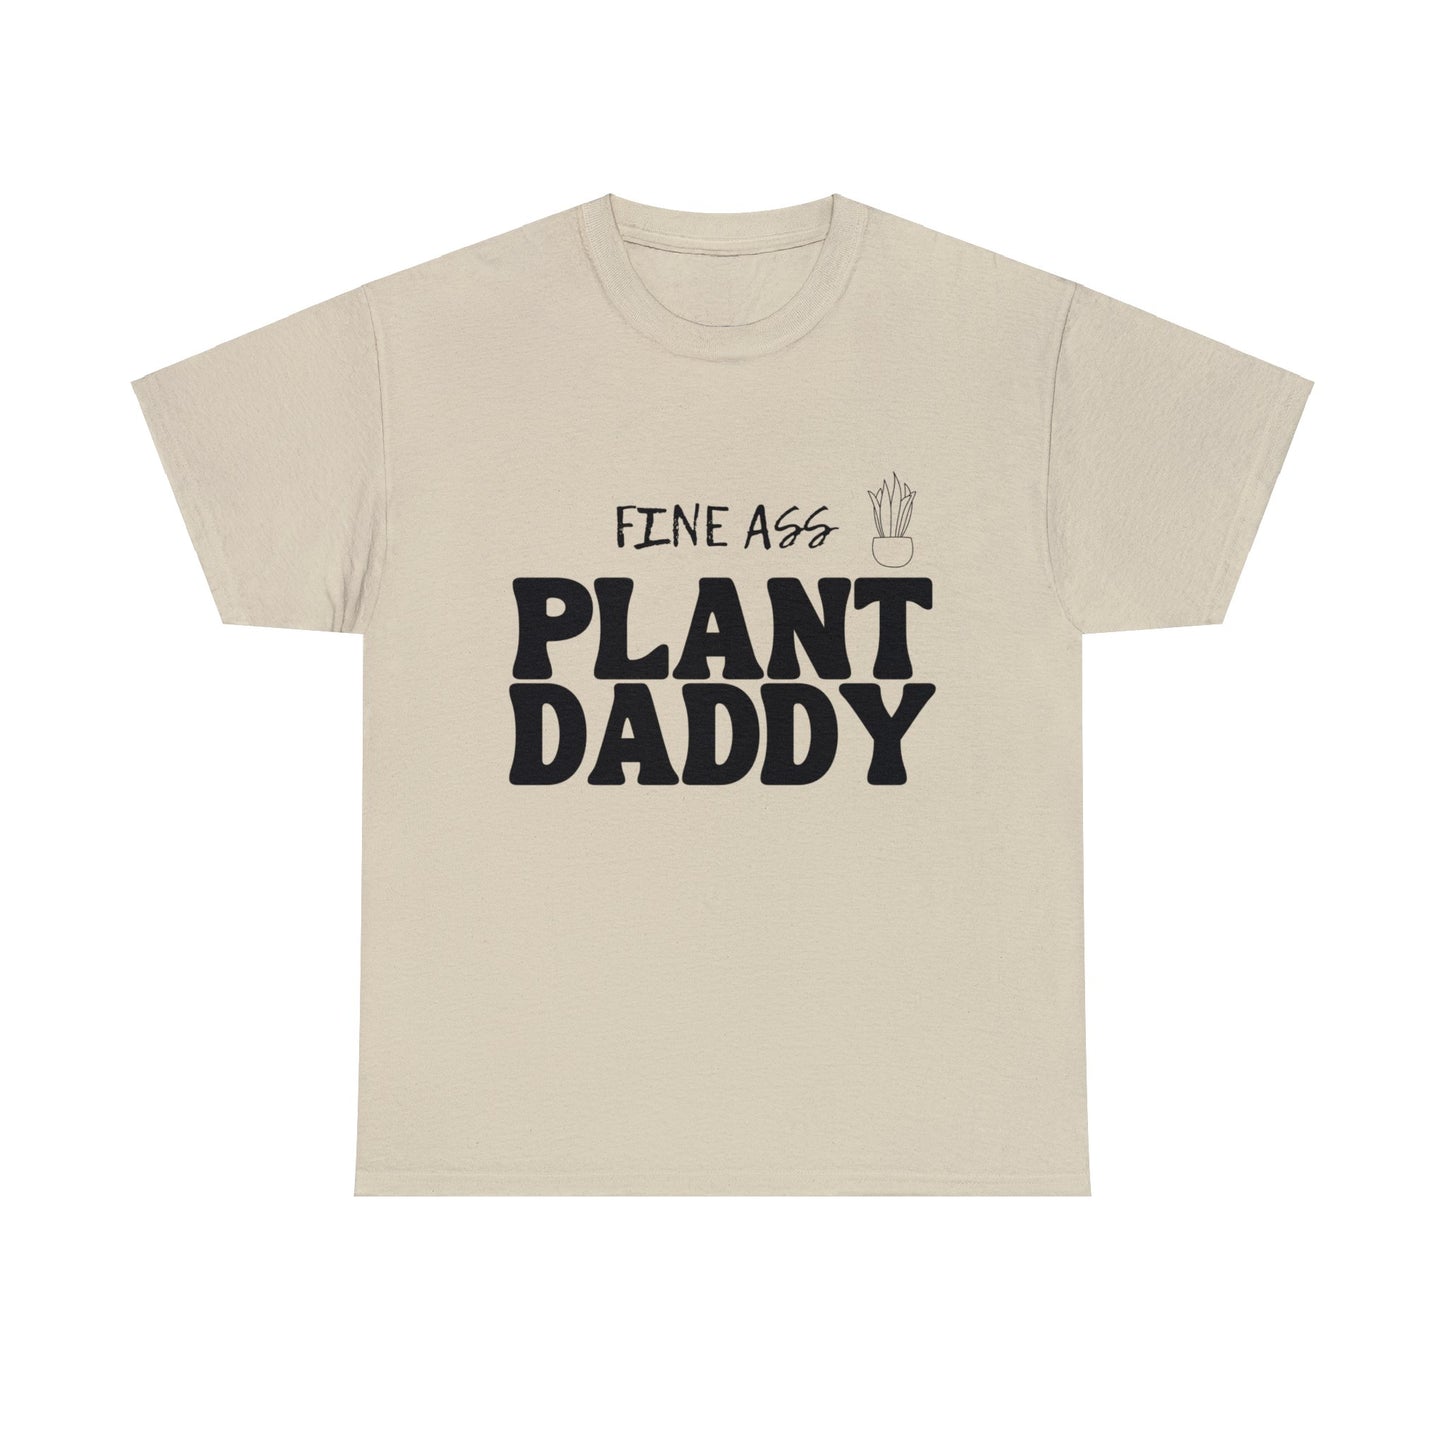 FINE ASS PLANT DADDY - TEE